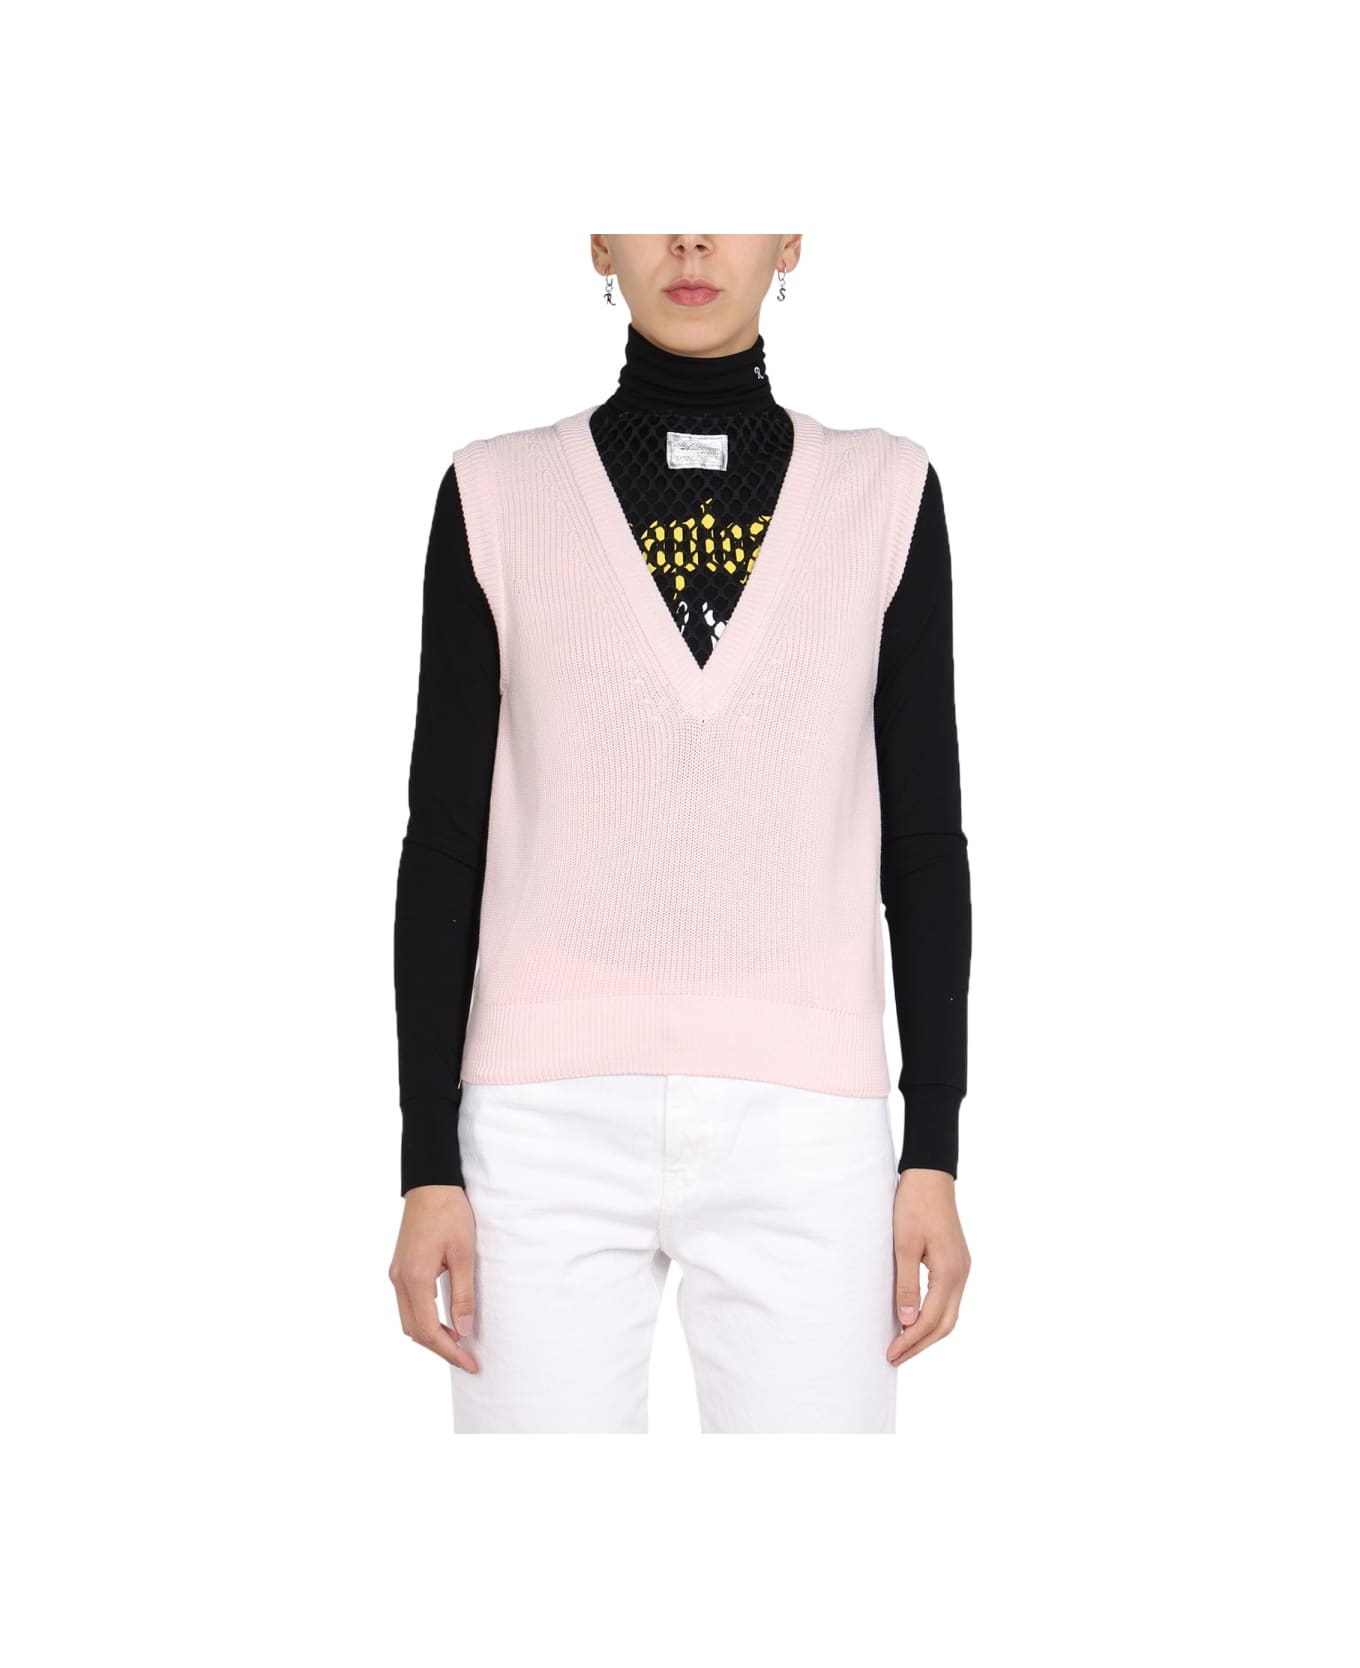 Raf Simons Knitted Vest - PINK